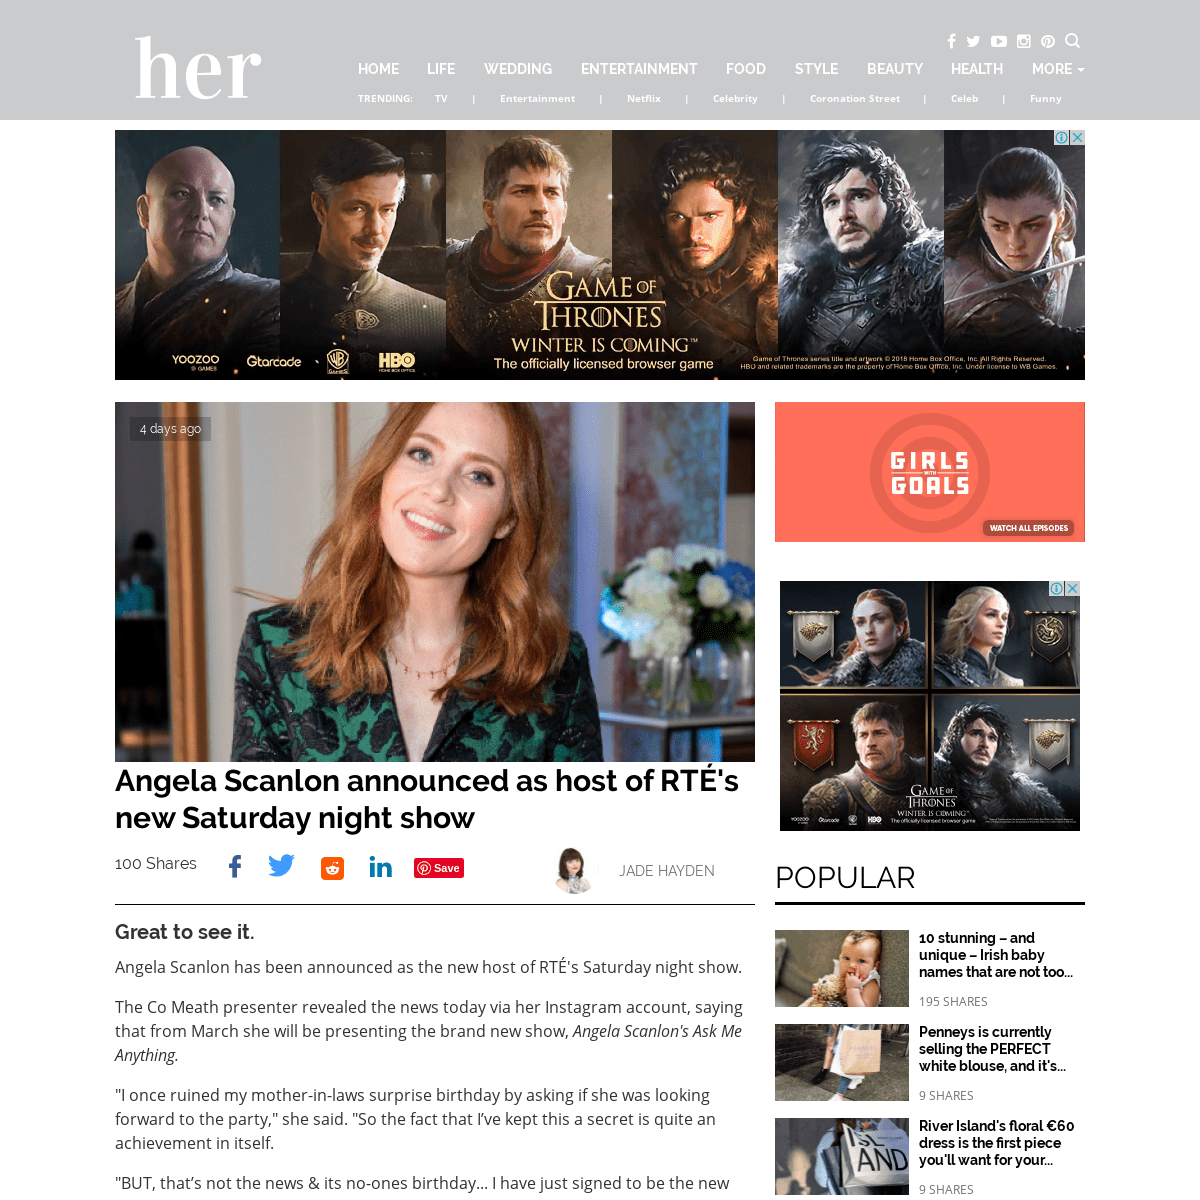 A complete backup of www.her.ie/entertainment/angela-scanlon-497177